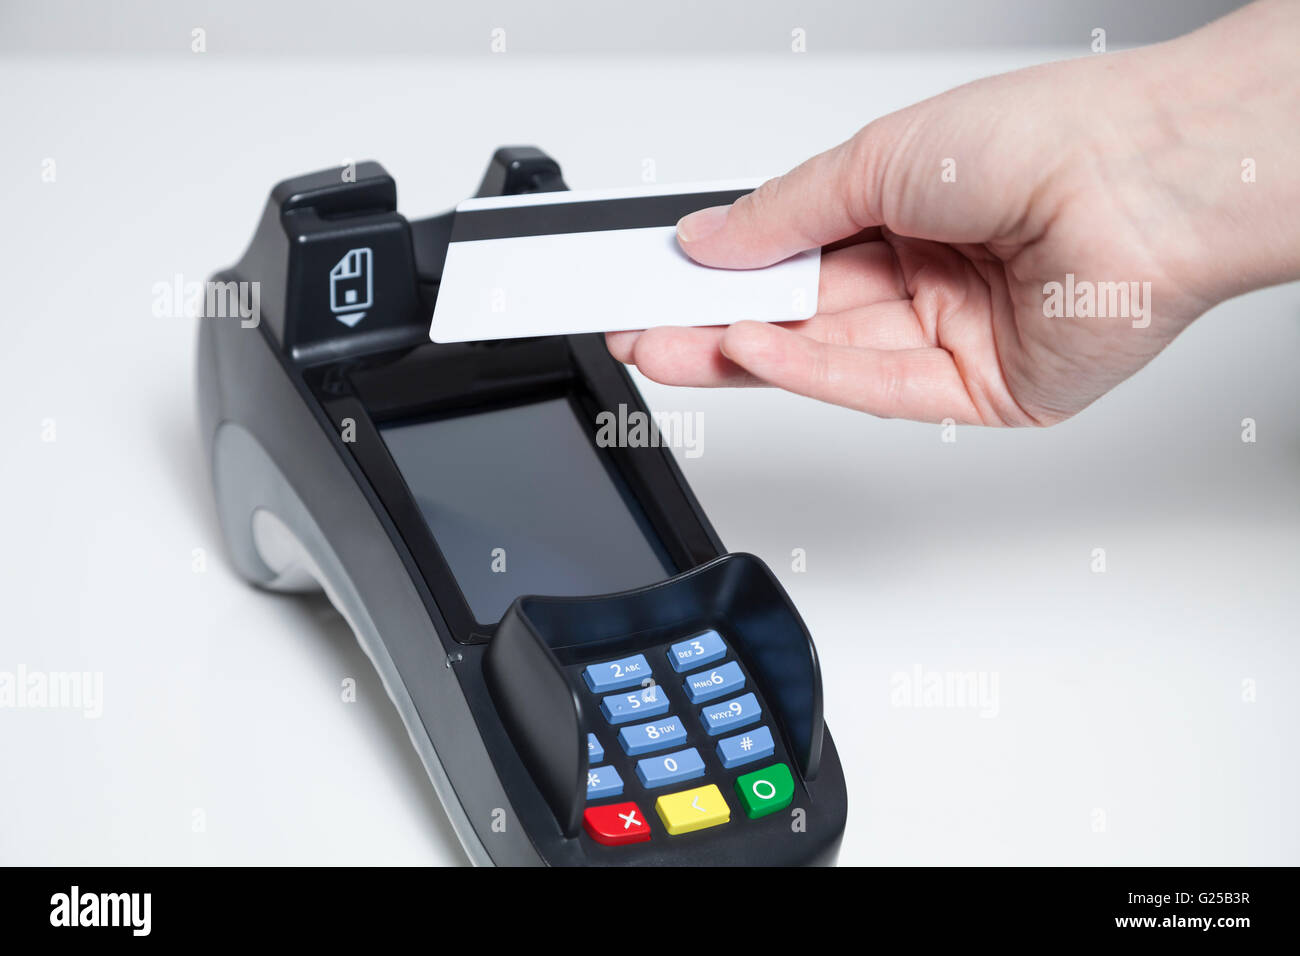 Contactless with a card an card reader Stock Photo